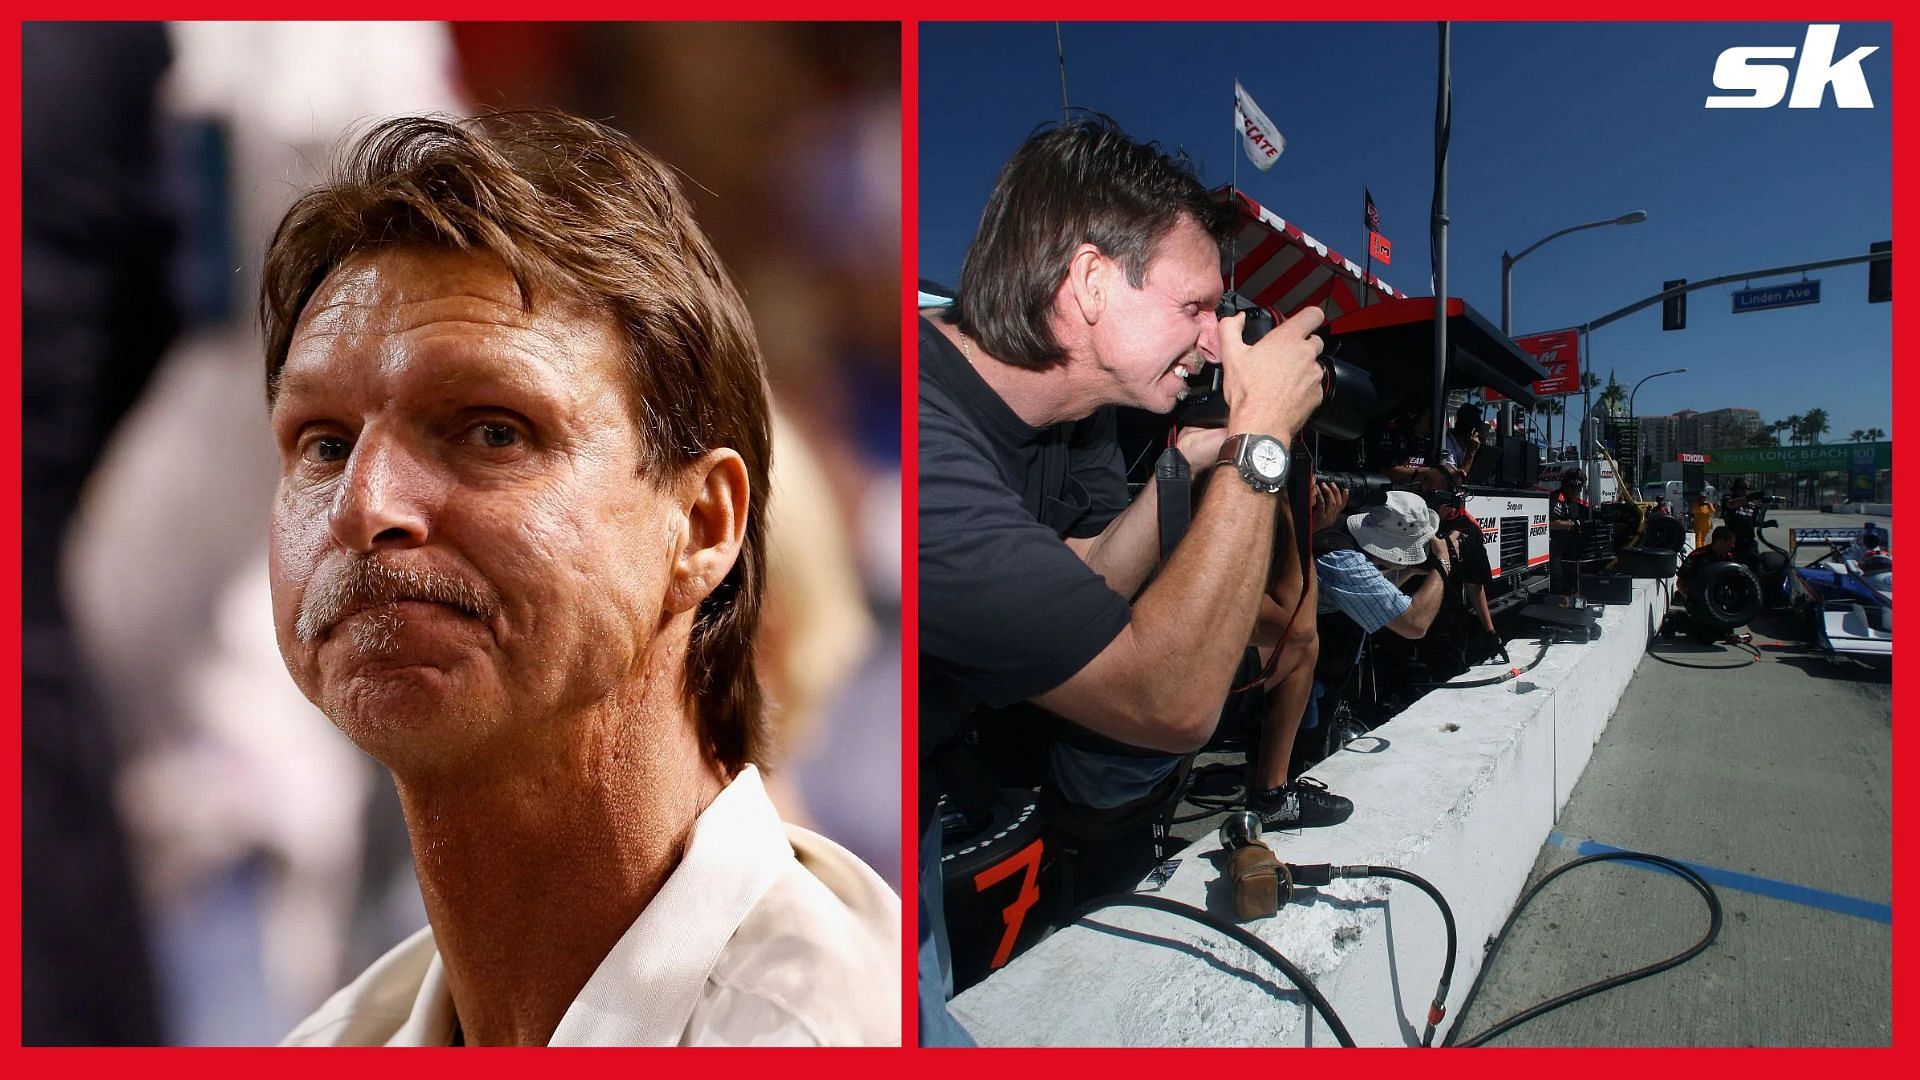 Randy Johnson: From Hall of Fame Pitcher to Pro Photographer